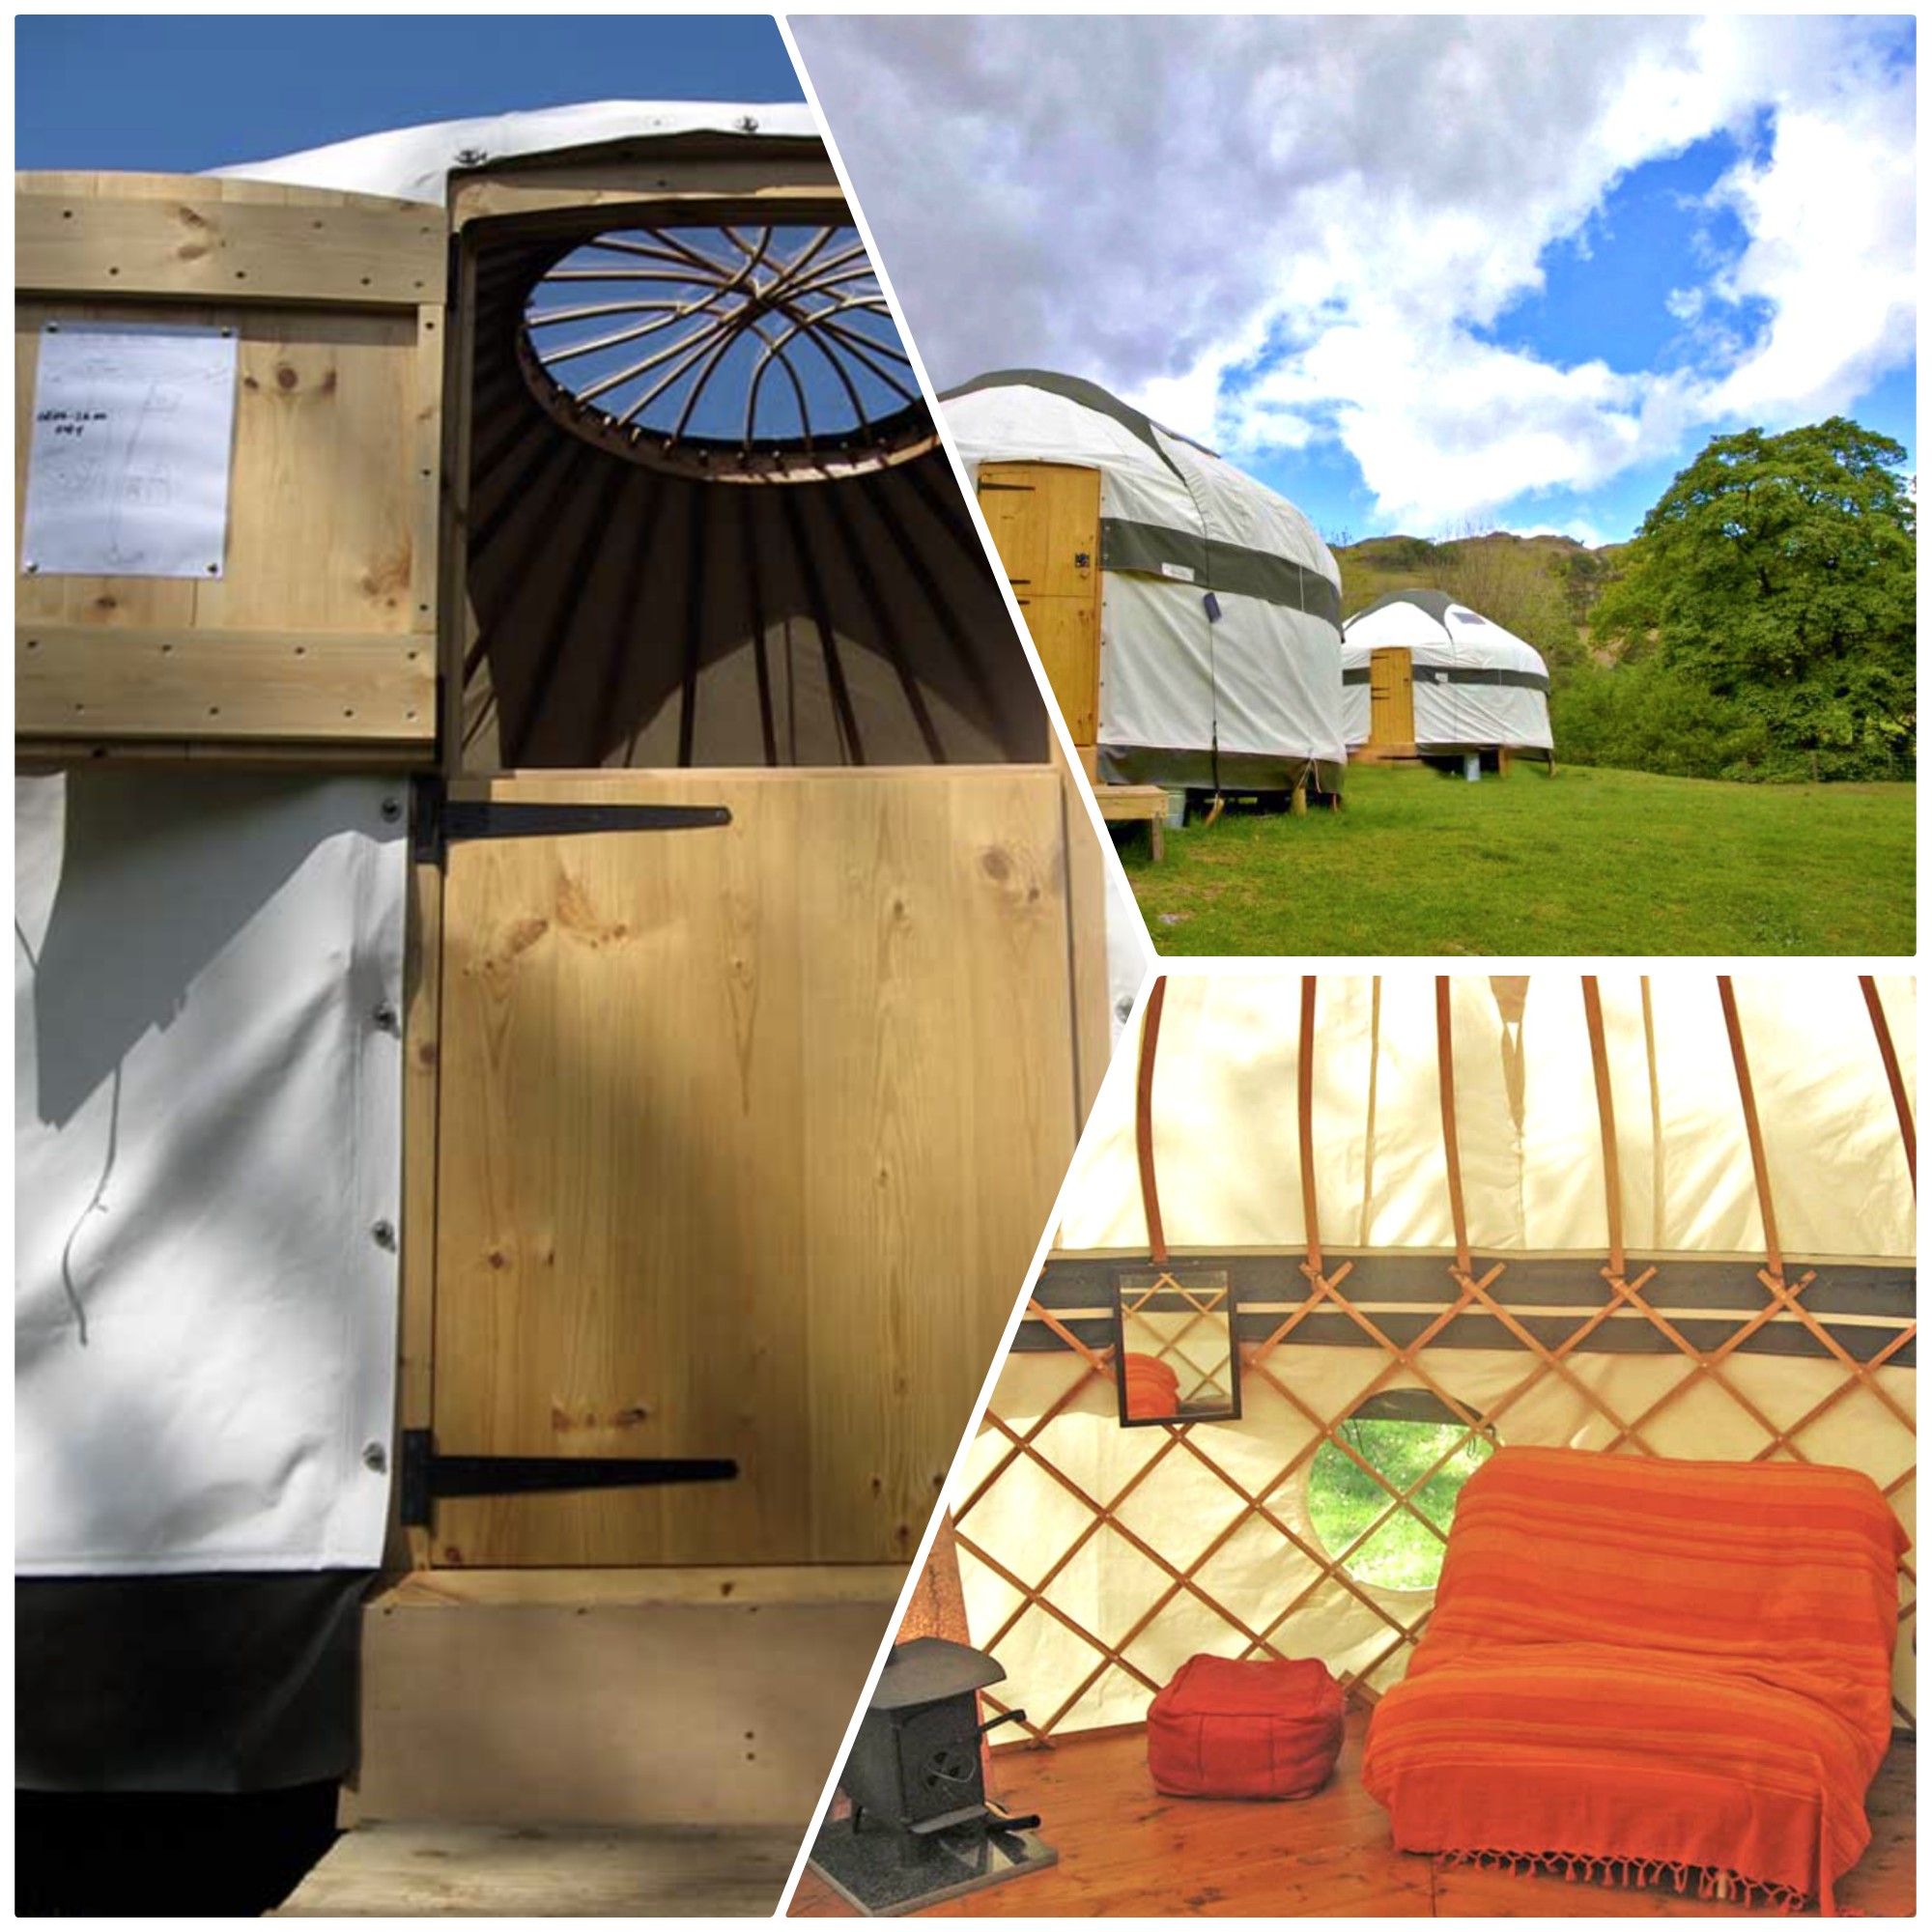 Glamping! Beautiful Yurts with glowing reviews by previous guests in the Borrowdale Valley